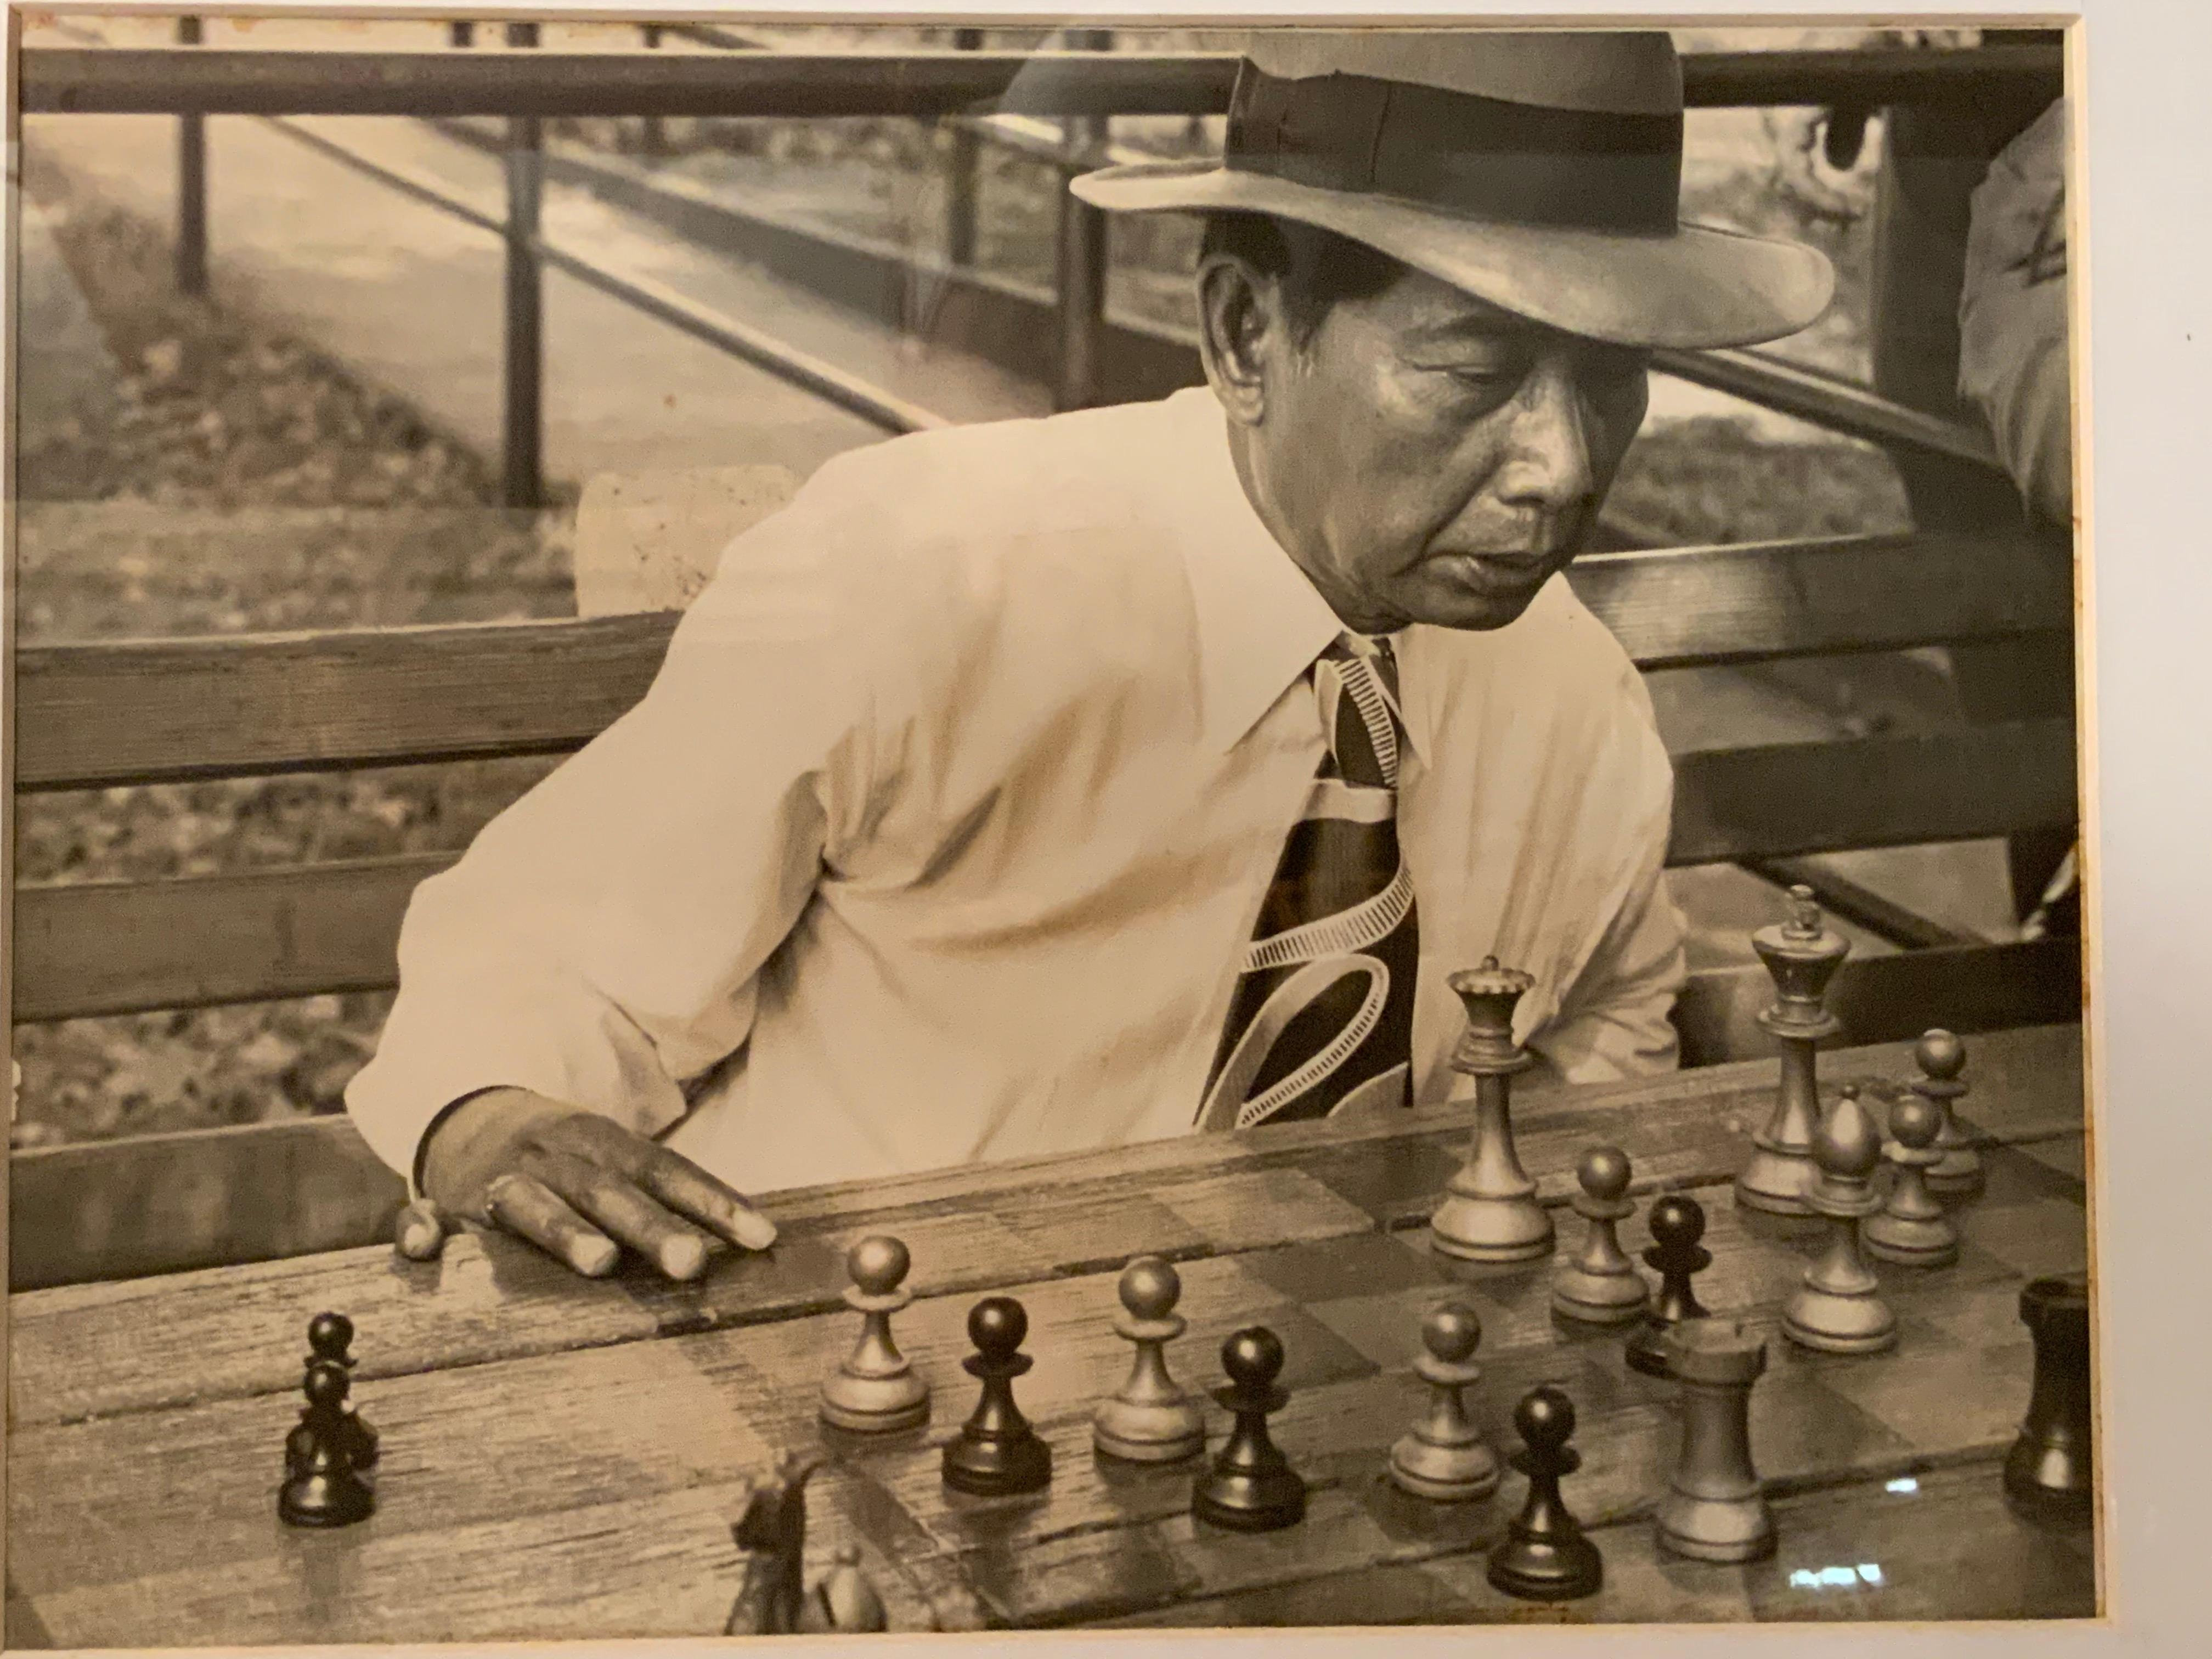 Mid-Century Modern 1950s Photograph Mexican Chess Player by Raymond Groce